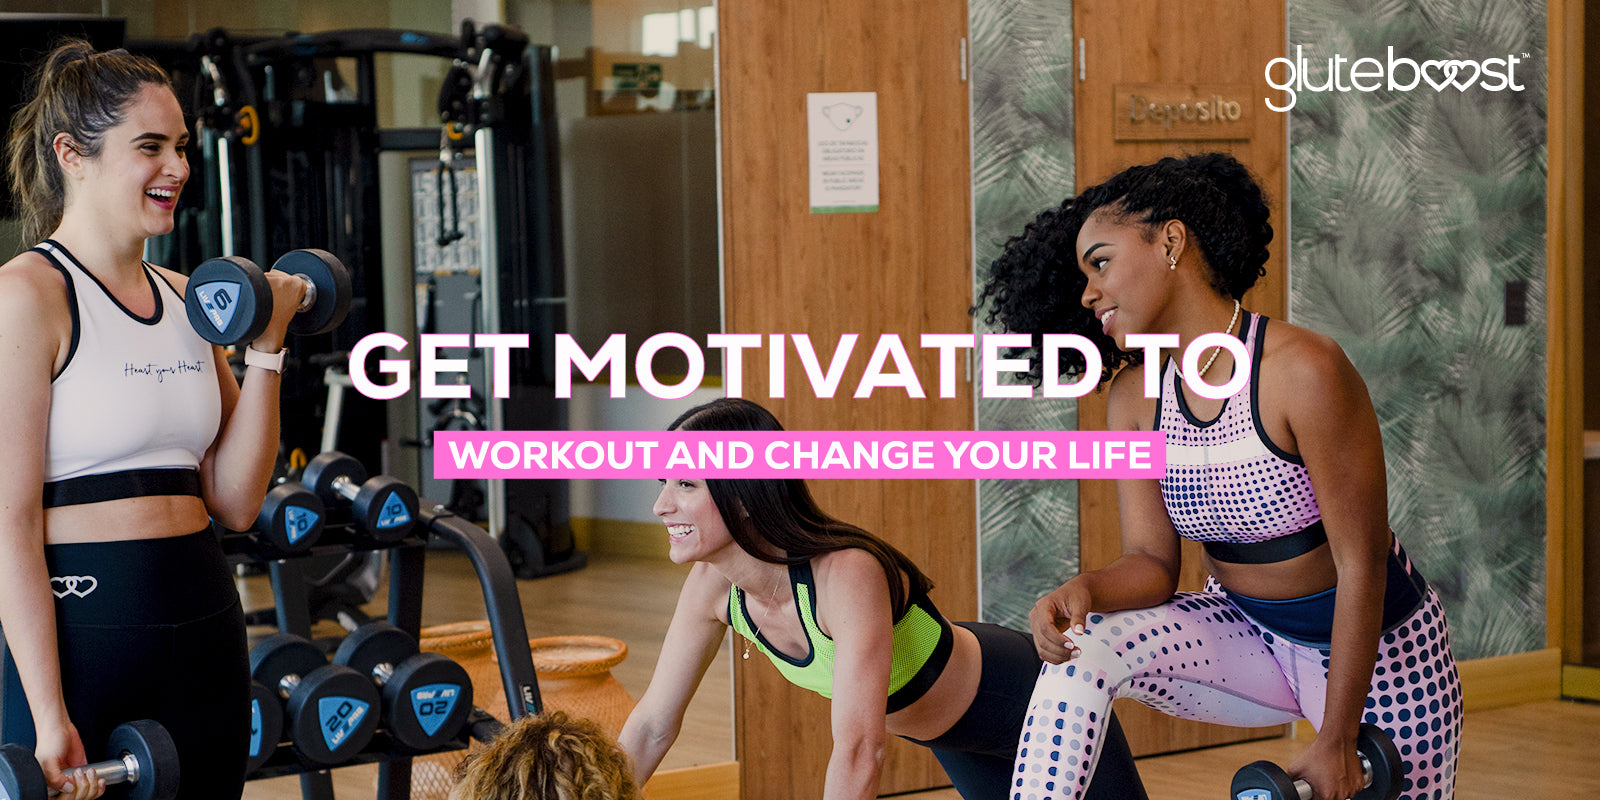 Getting motivated to workout and change your life